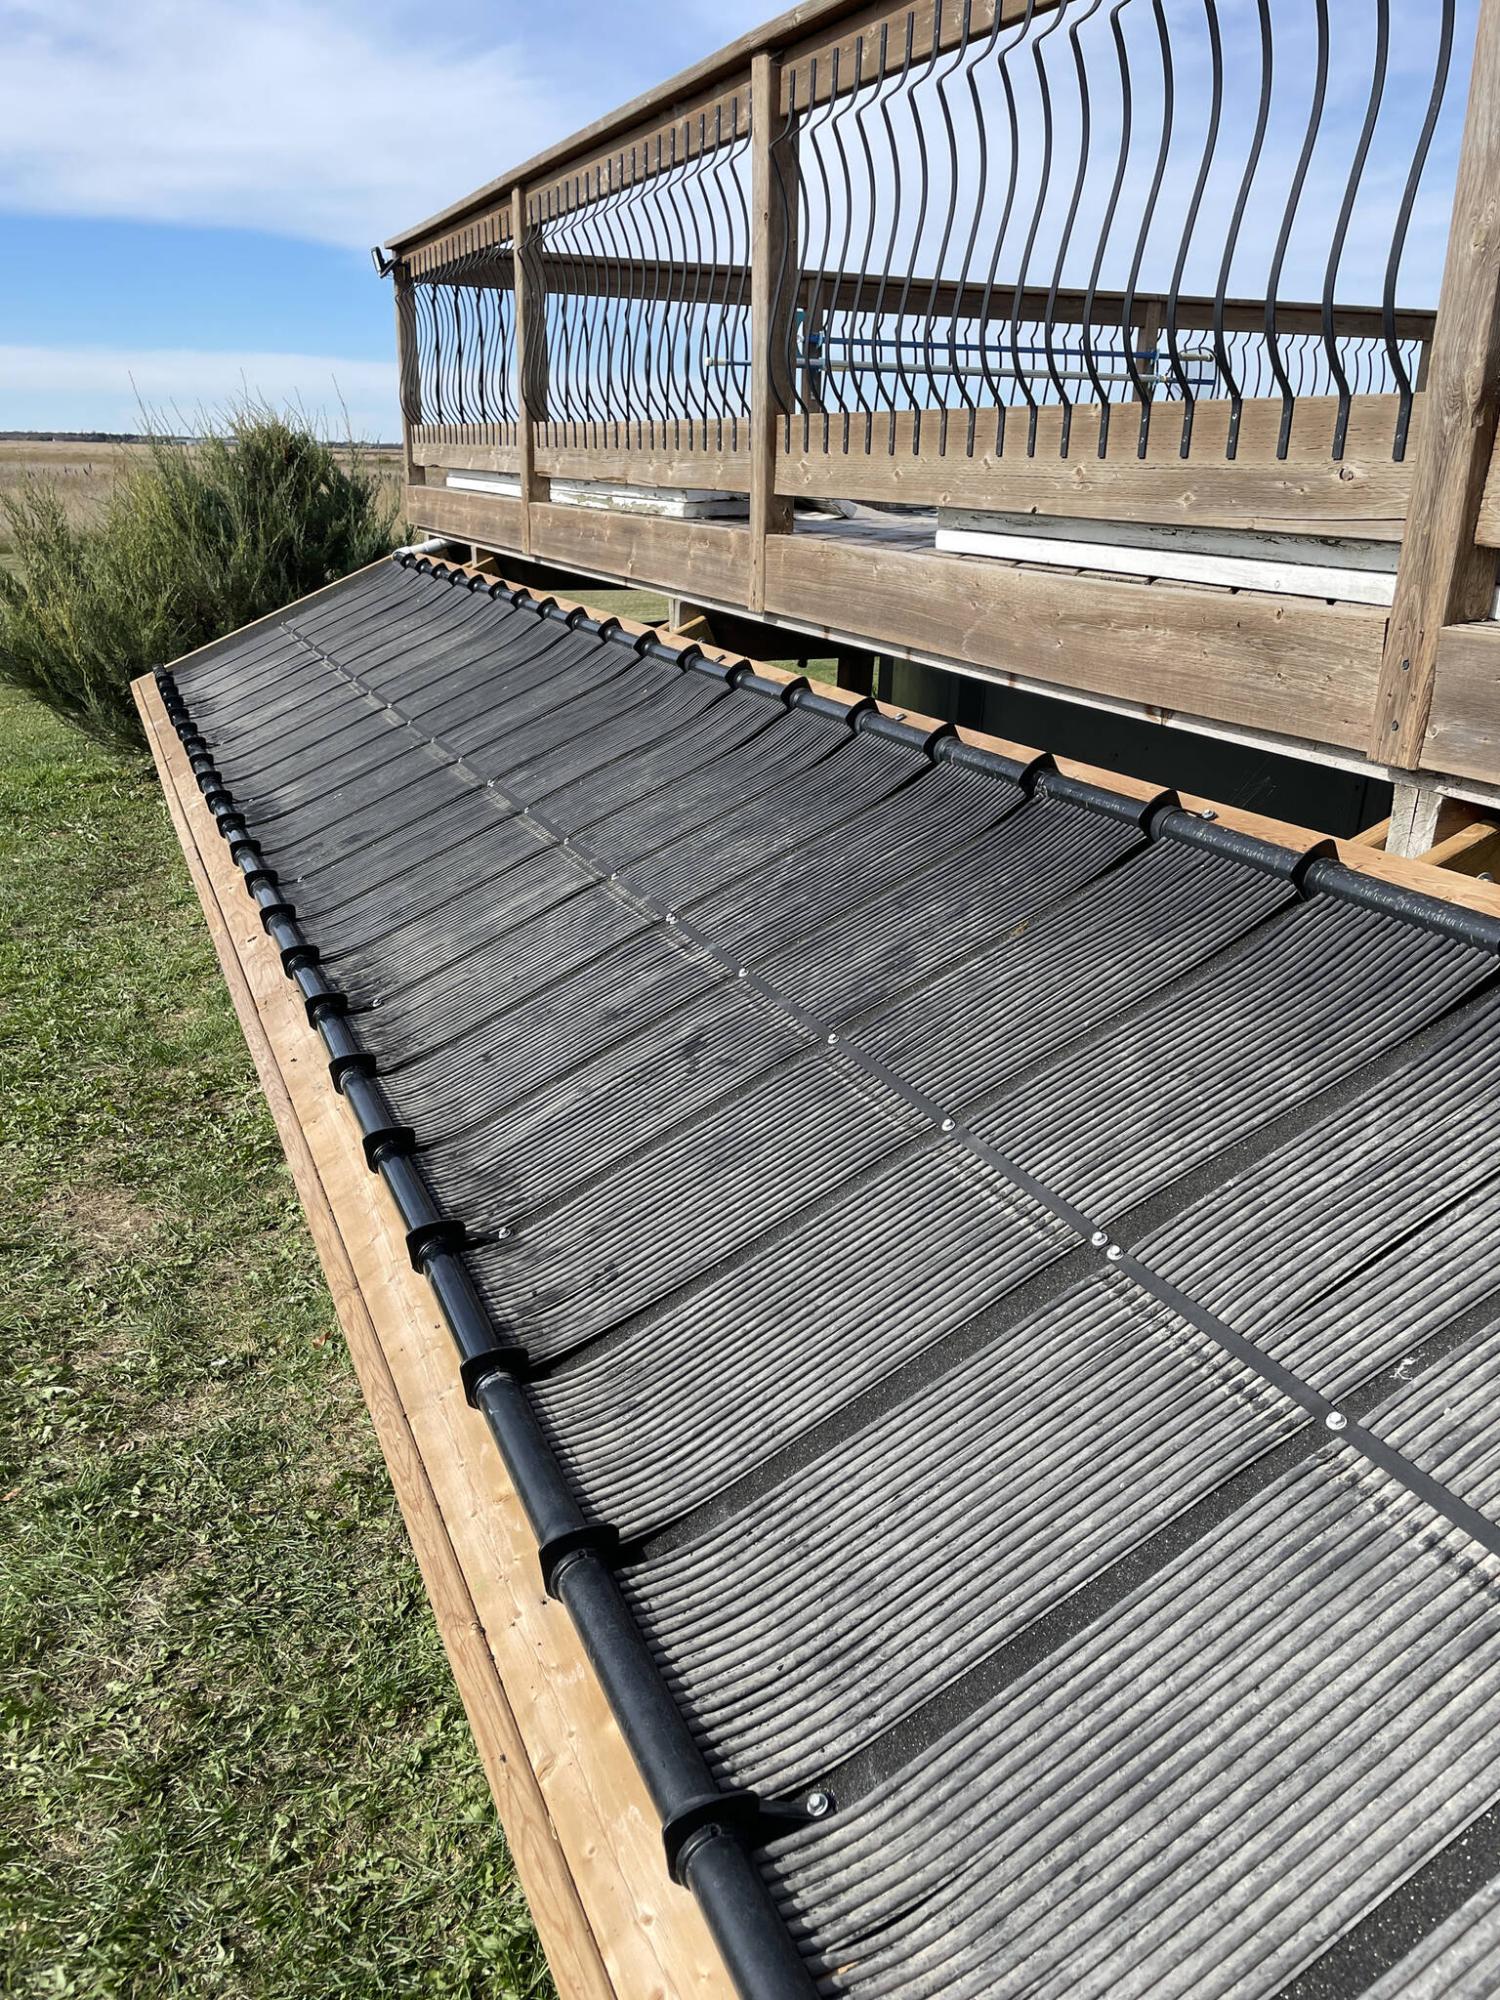  <p>Photos by Marc LaBossiere / Winnipeg Free Press</p>
                                <p>Despite suffering a dozen cracked headers due to freezing temperatures one night this fall, the solar array is again ready for use next season.</p> 